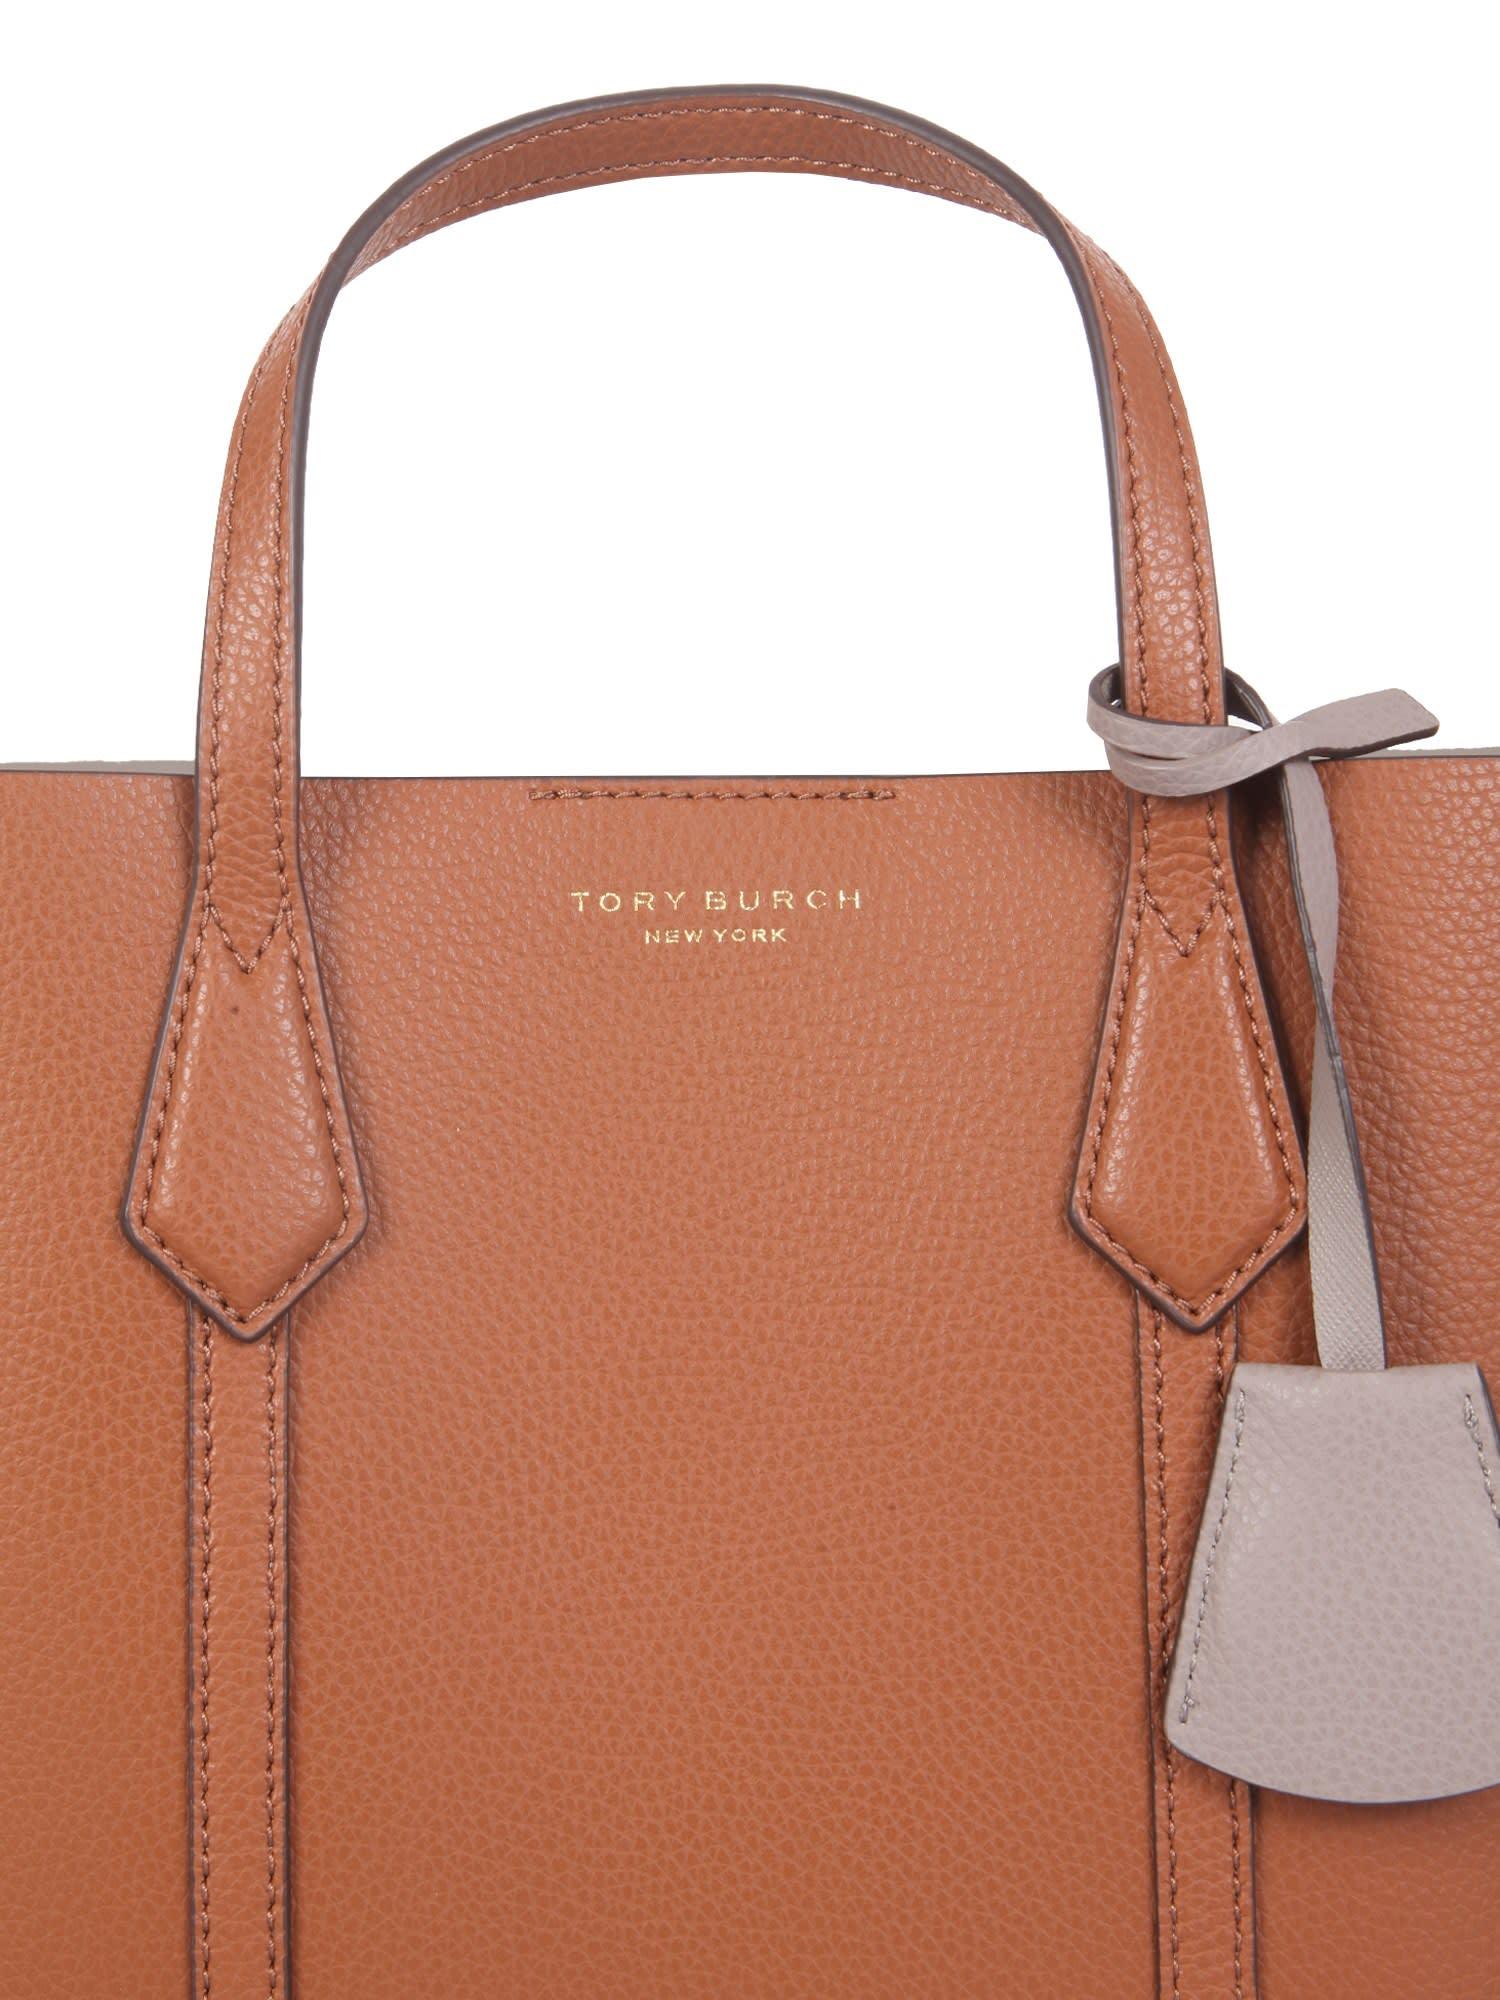 Tory Burch Small Perry Tote Bag in Brown | Lyst